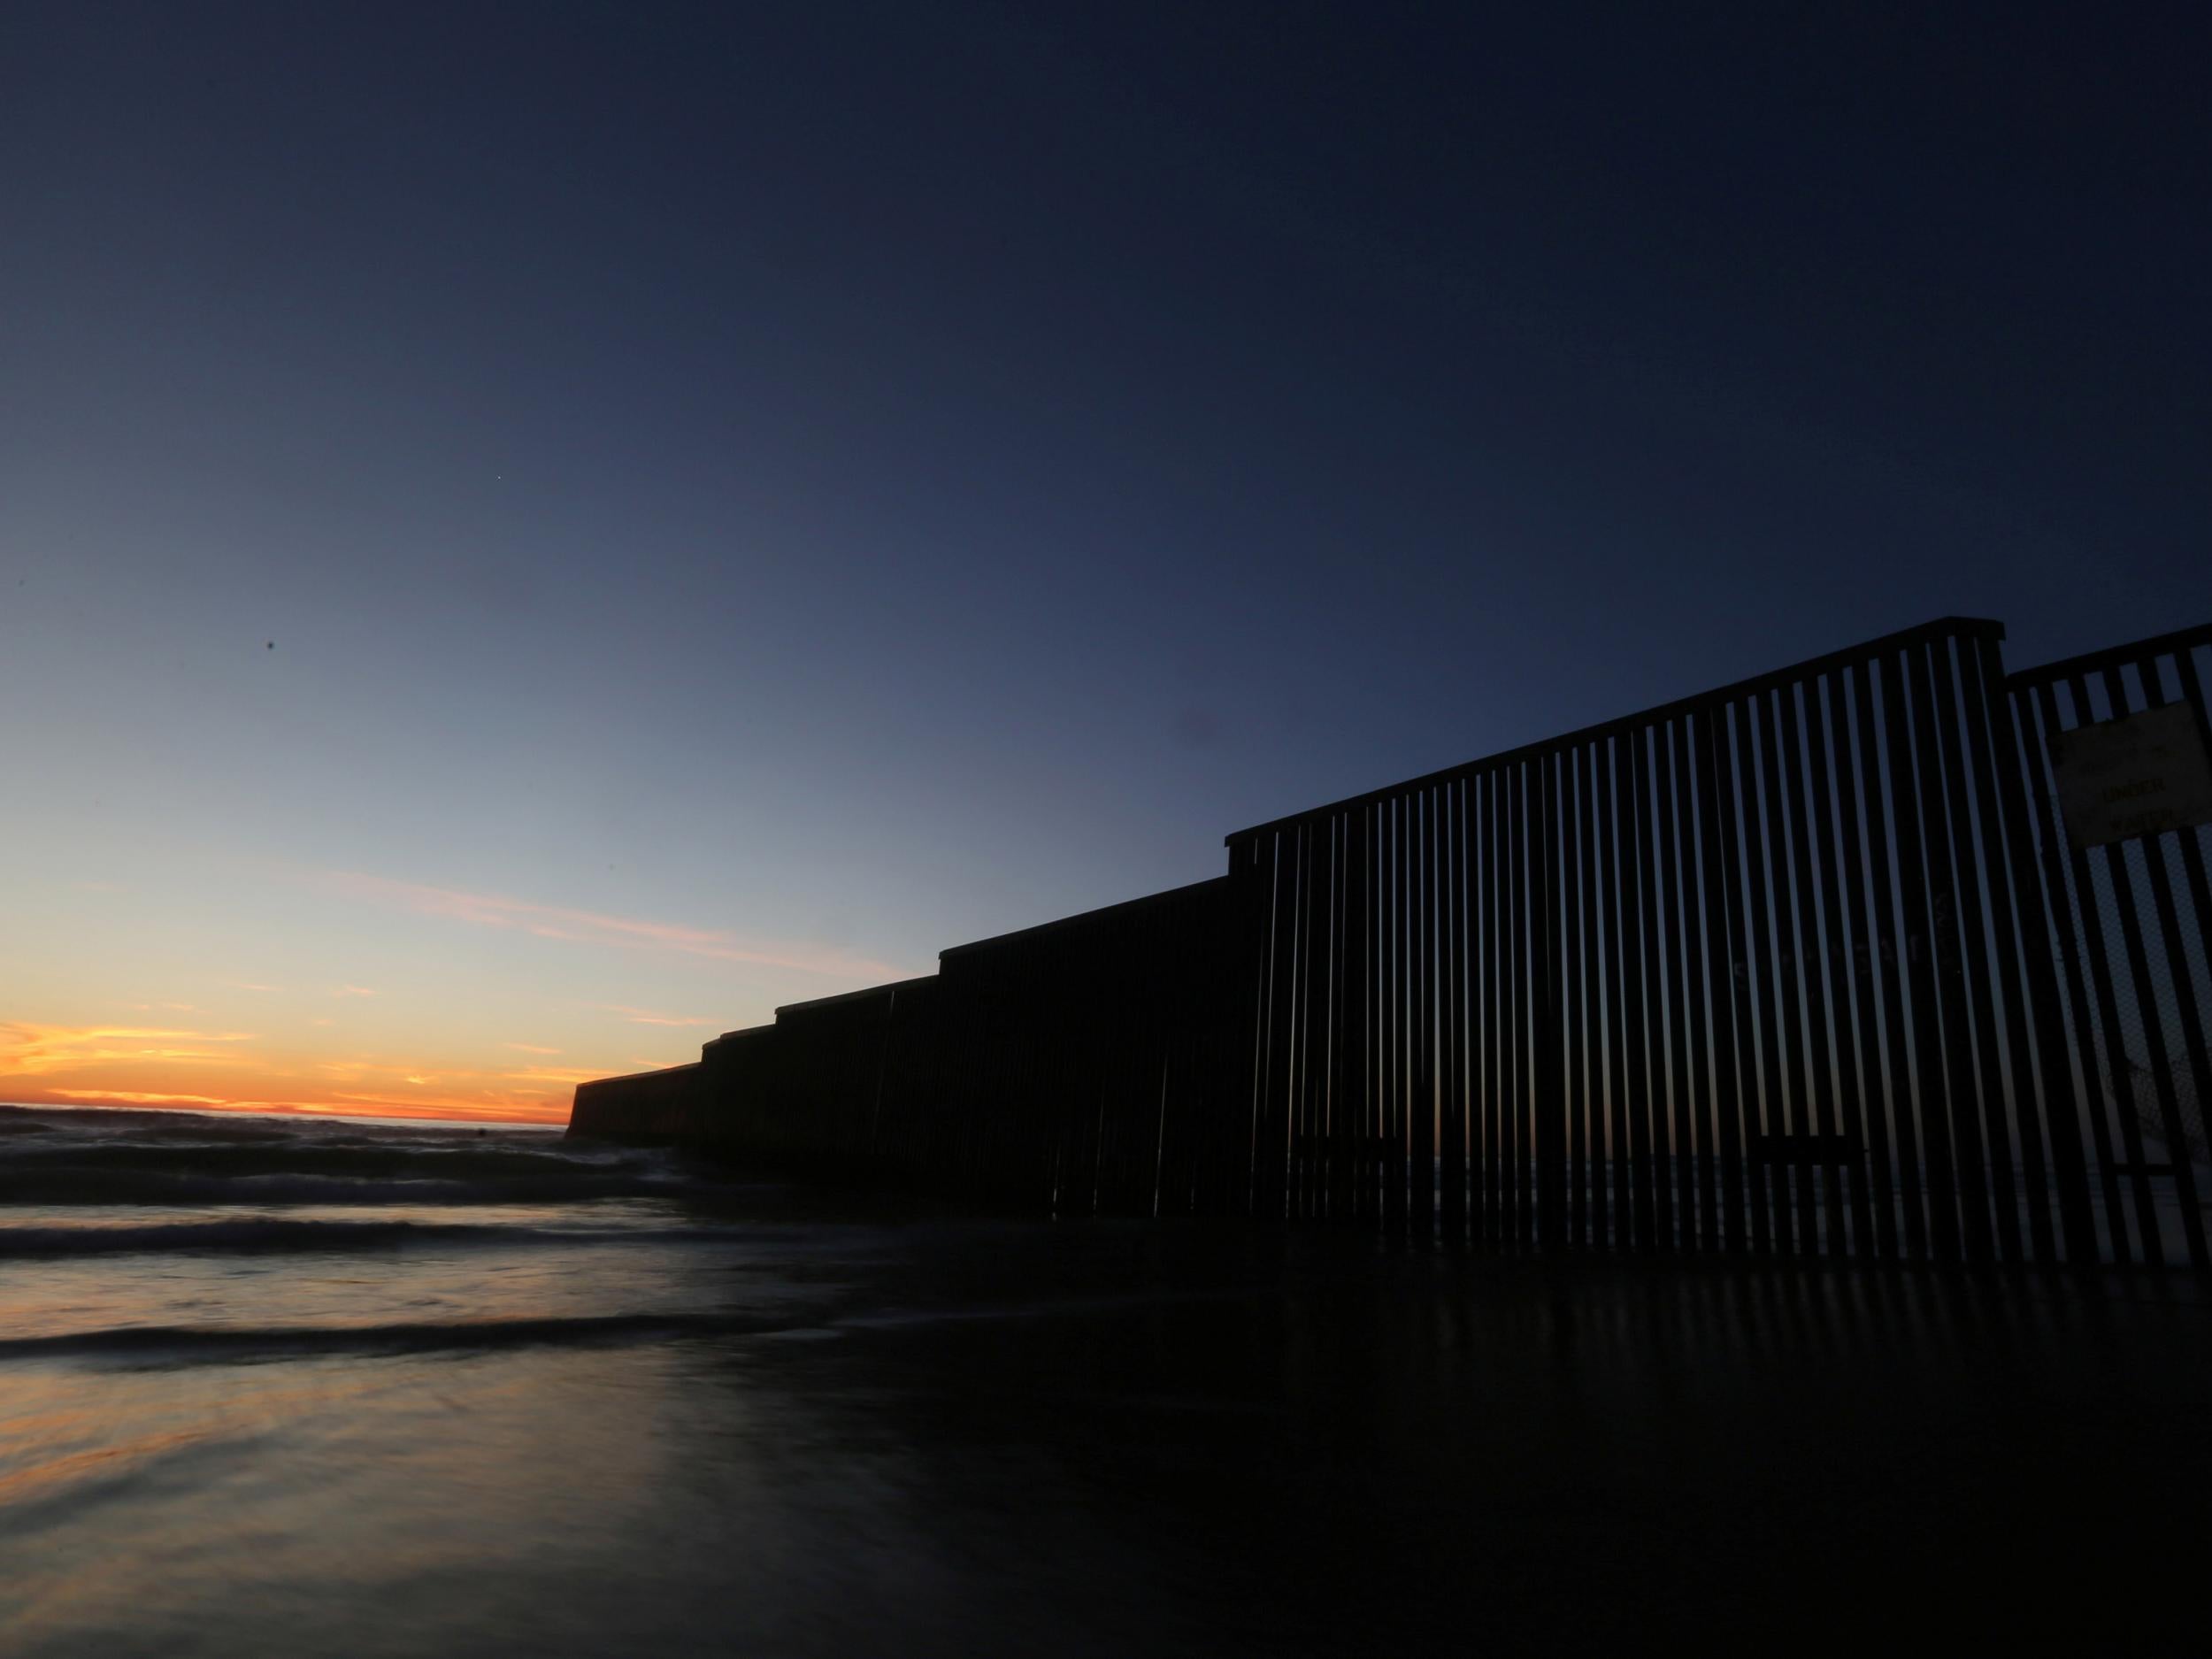 A section of the wall separating Mexico and the US in Tijuana